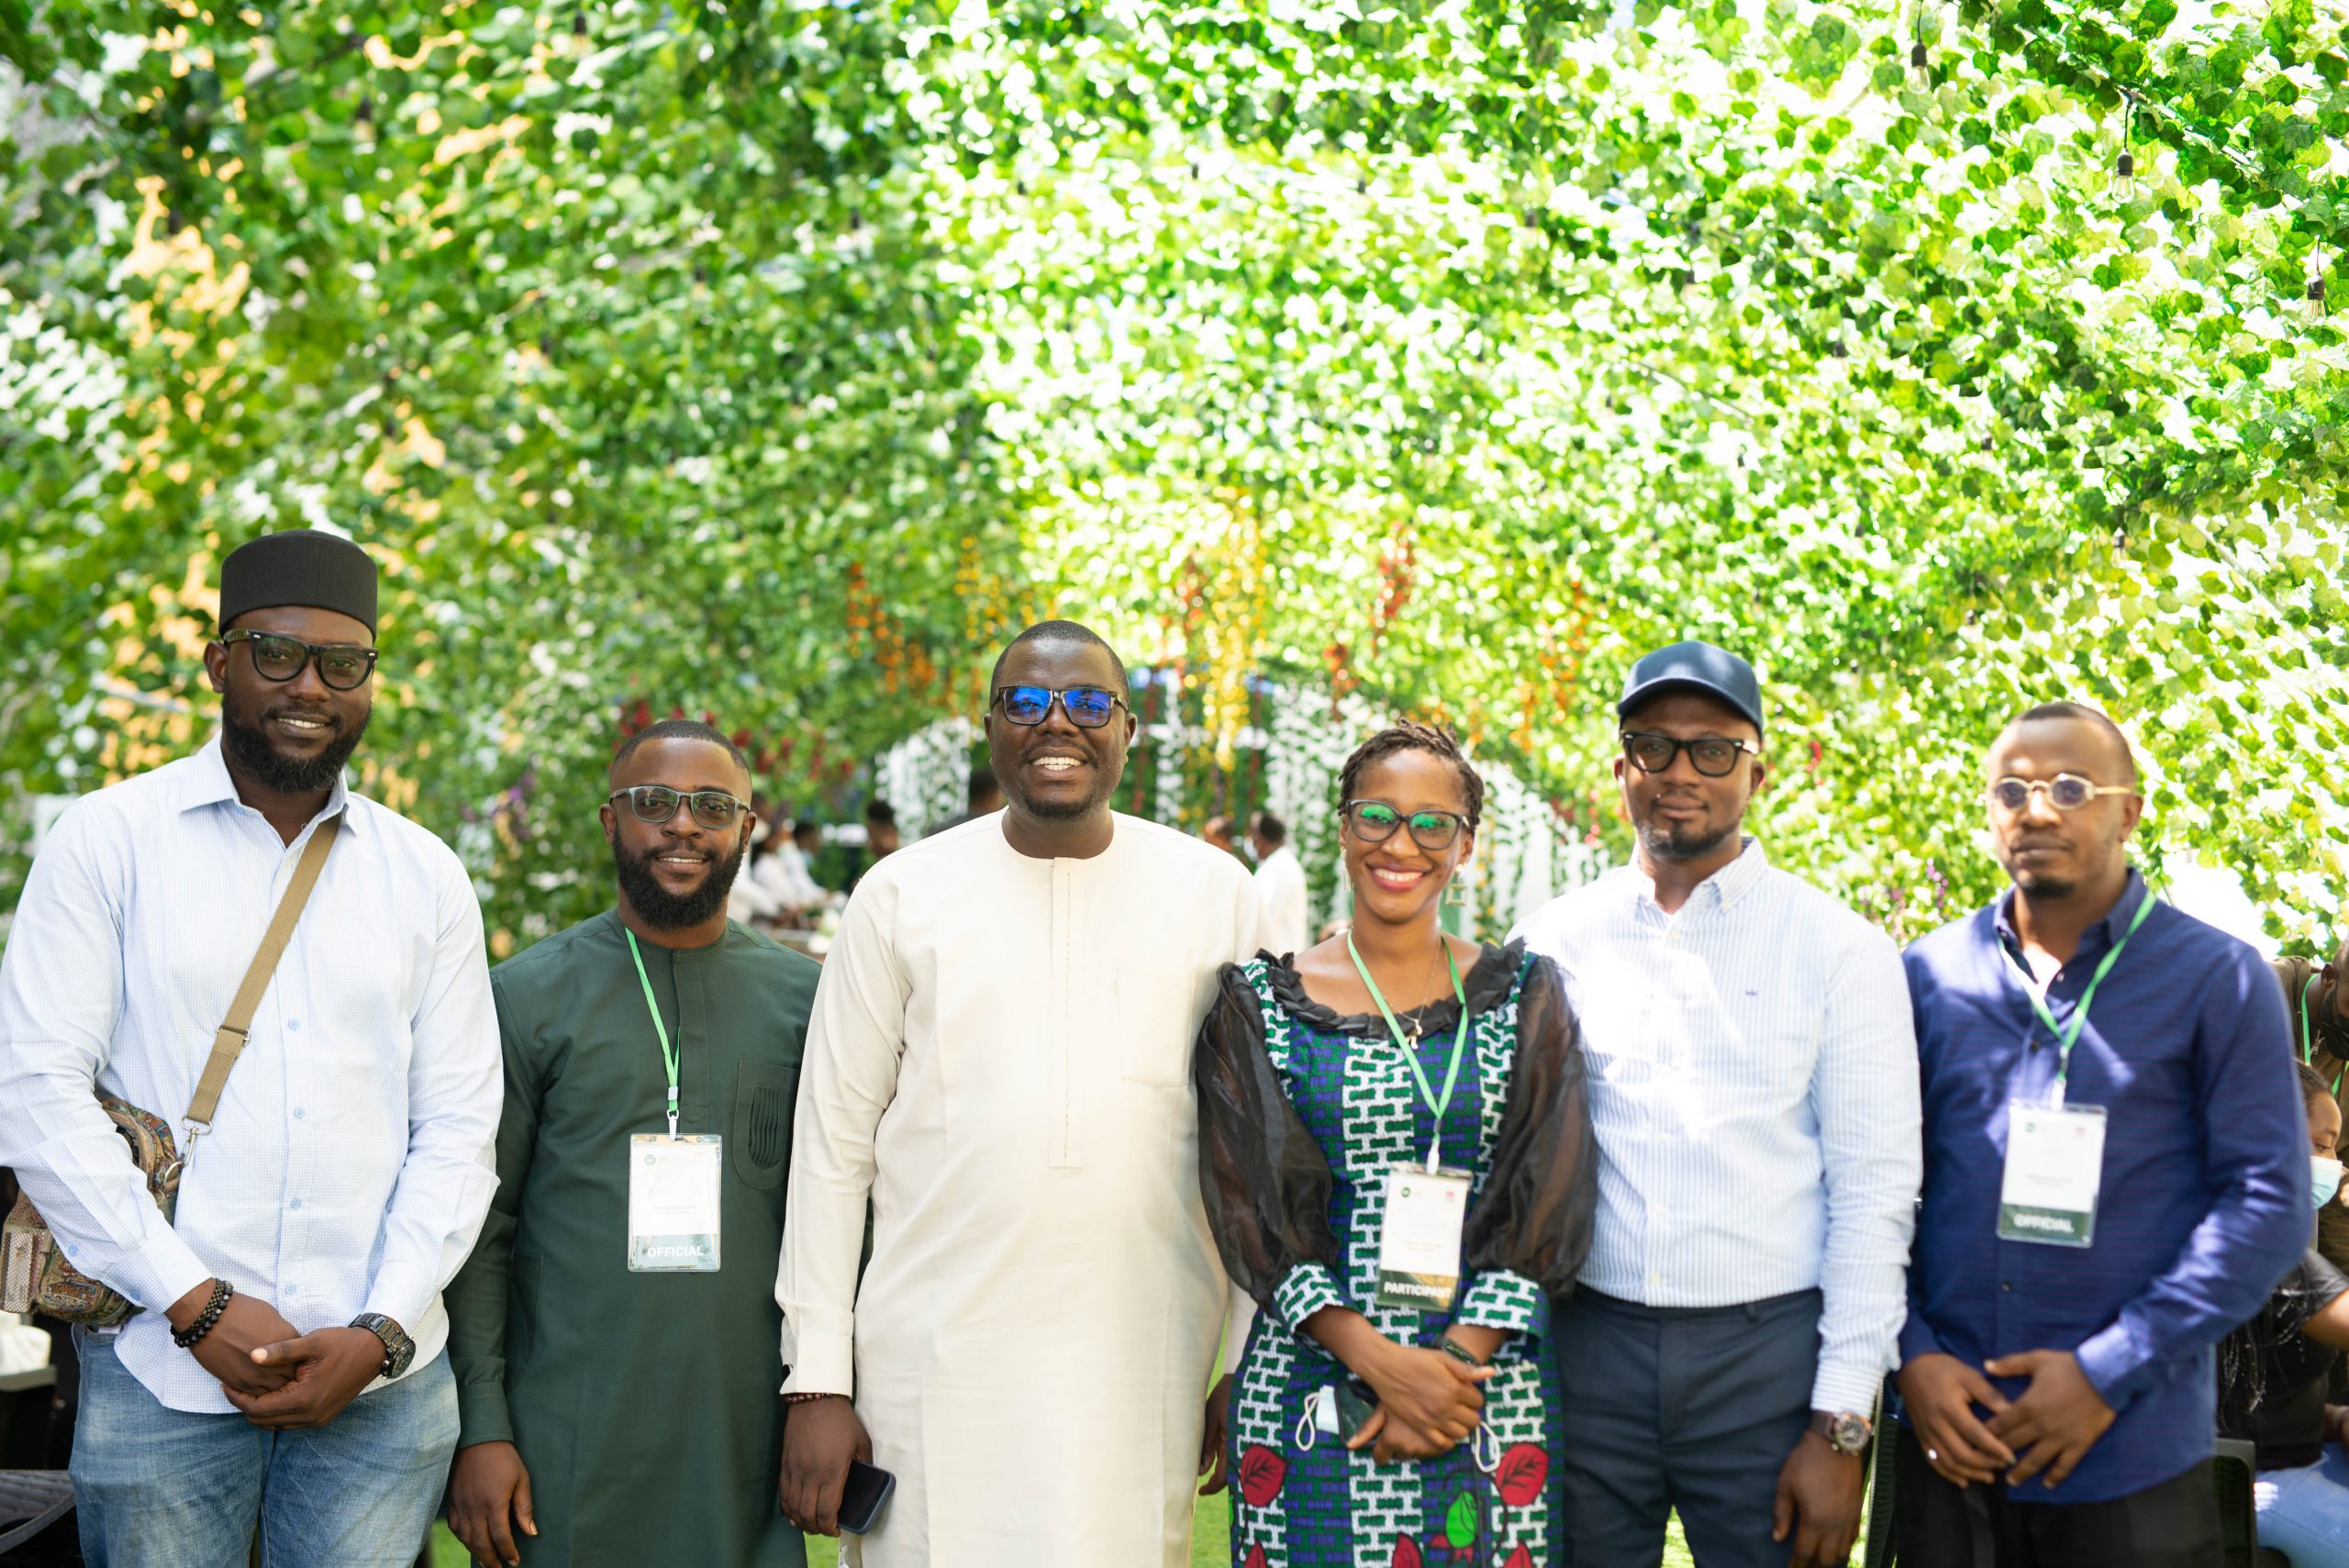 Highlights from the Ekiti State Innovation Action Plan Launch Event